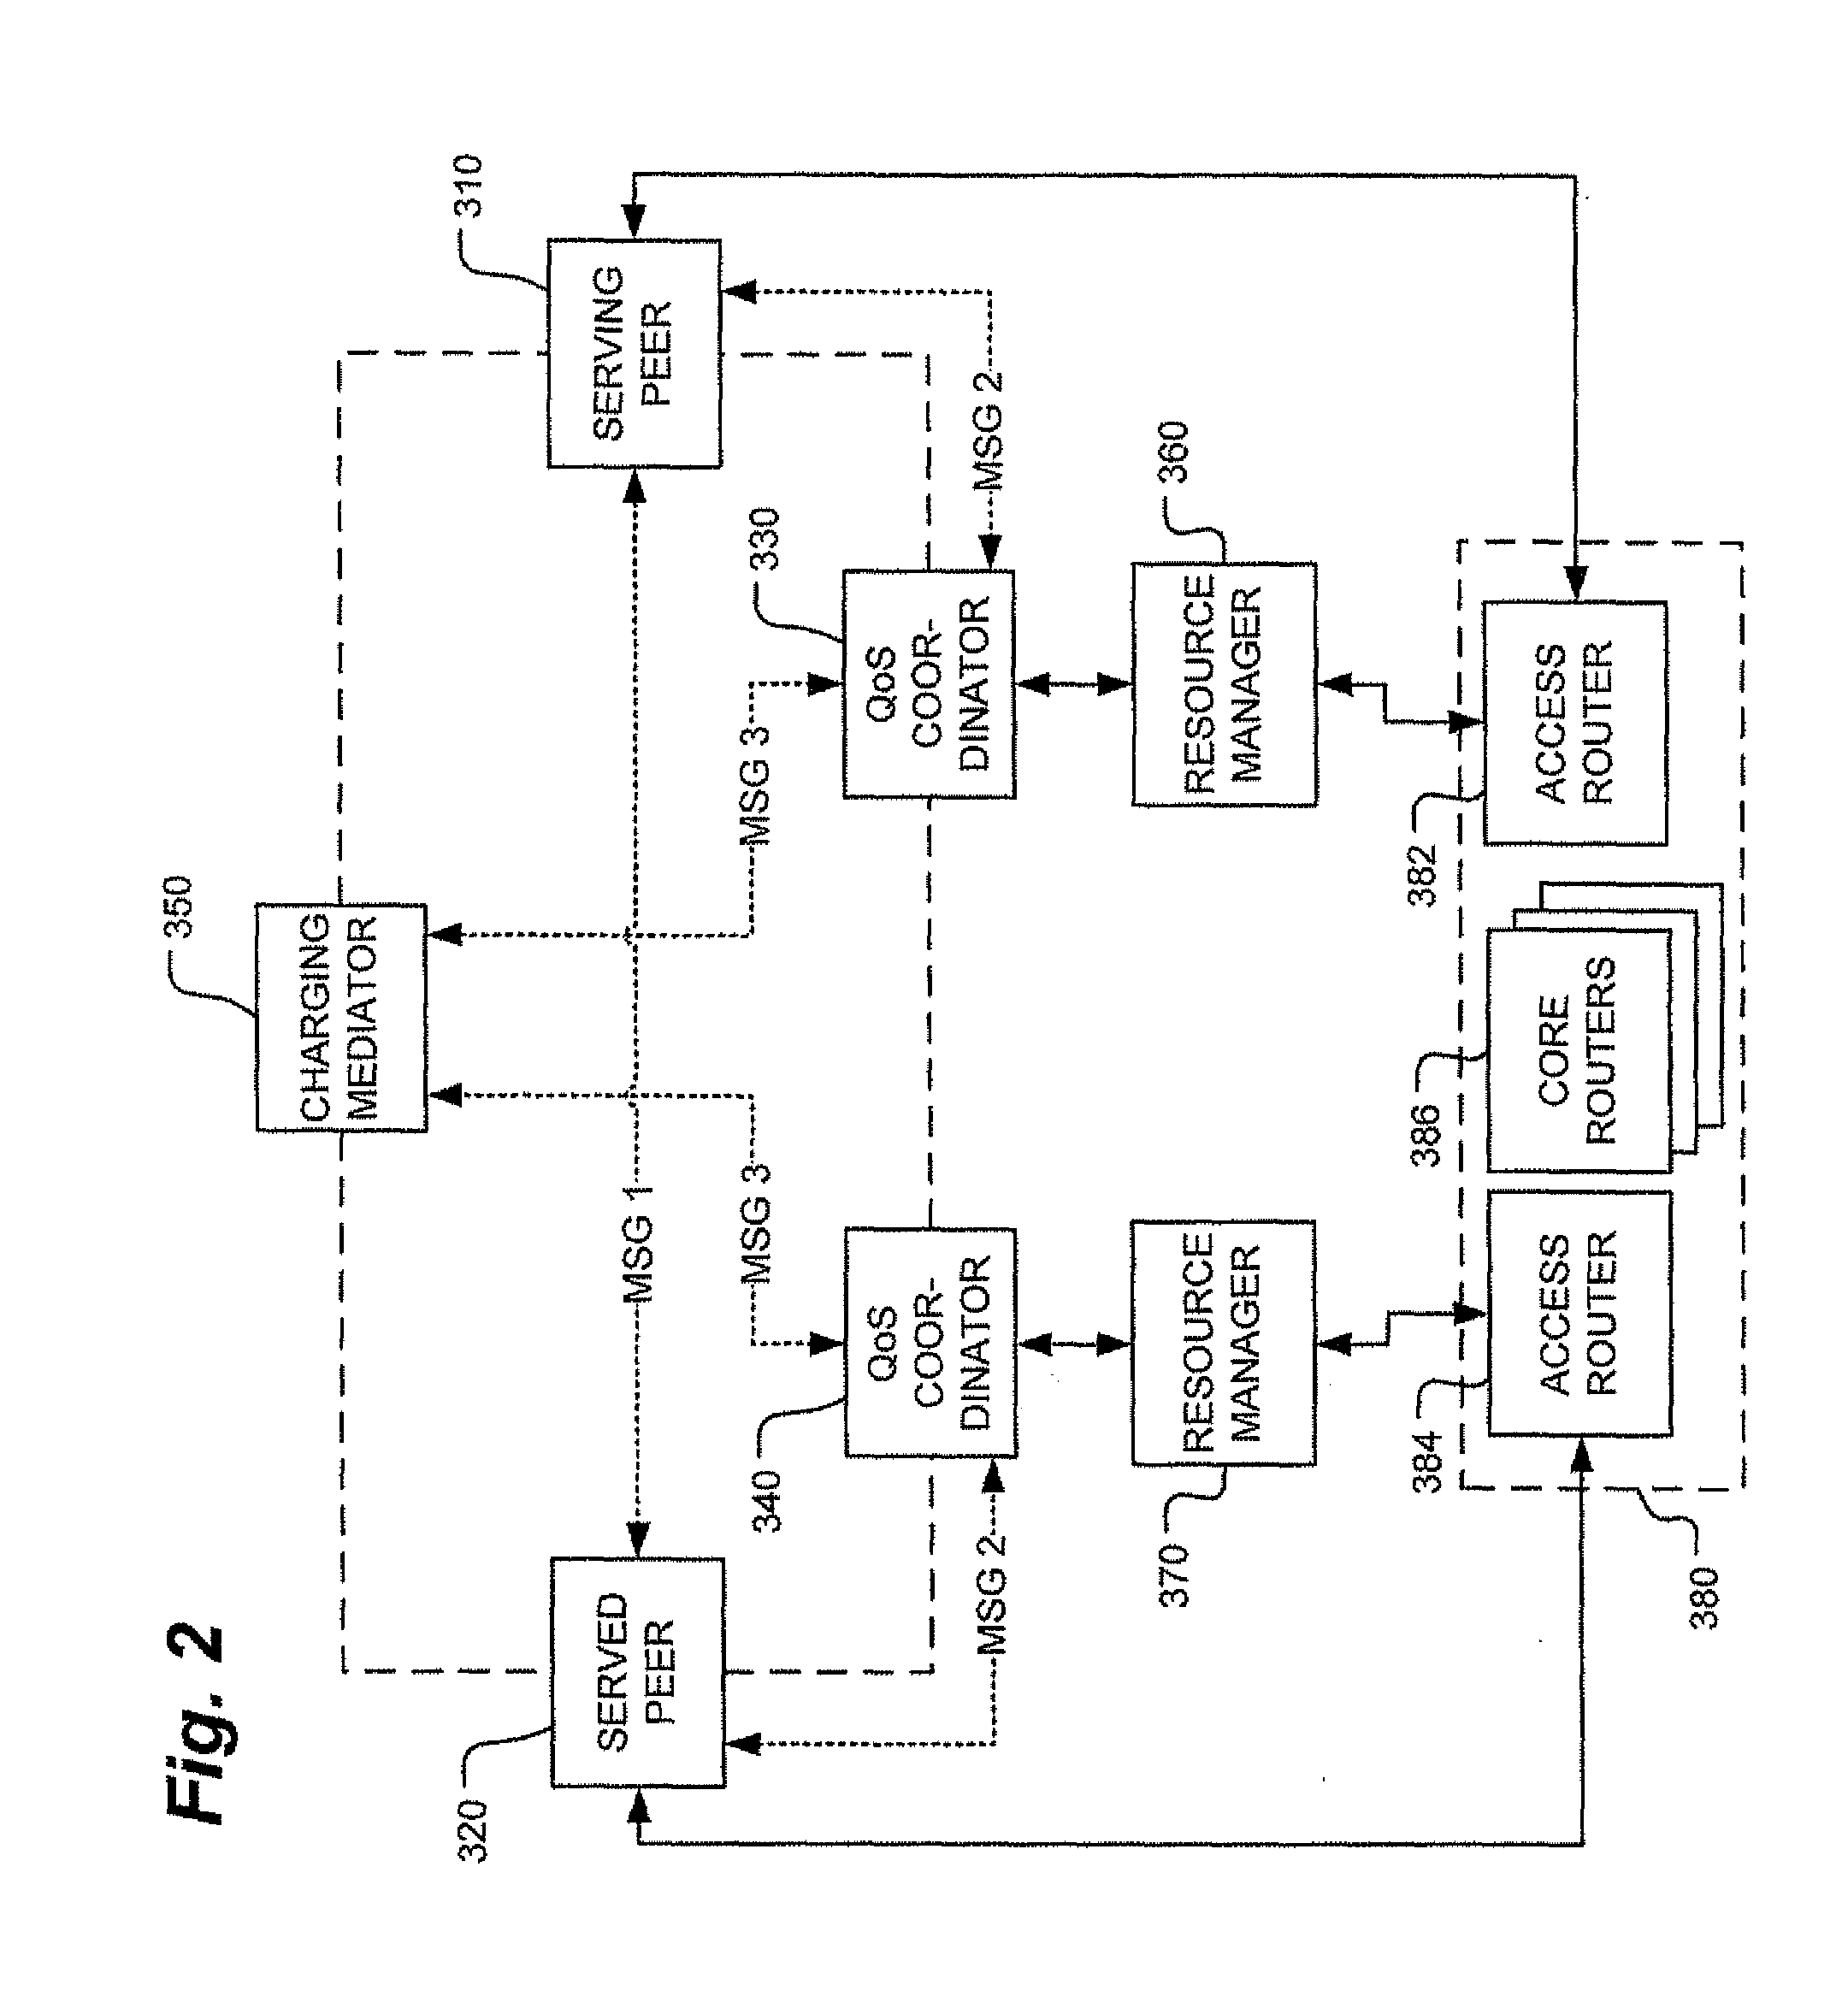 Carrier-grade peer-to-peer (P2P) network, system and method